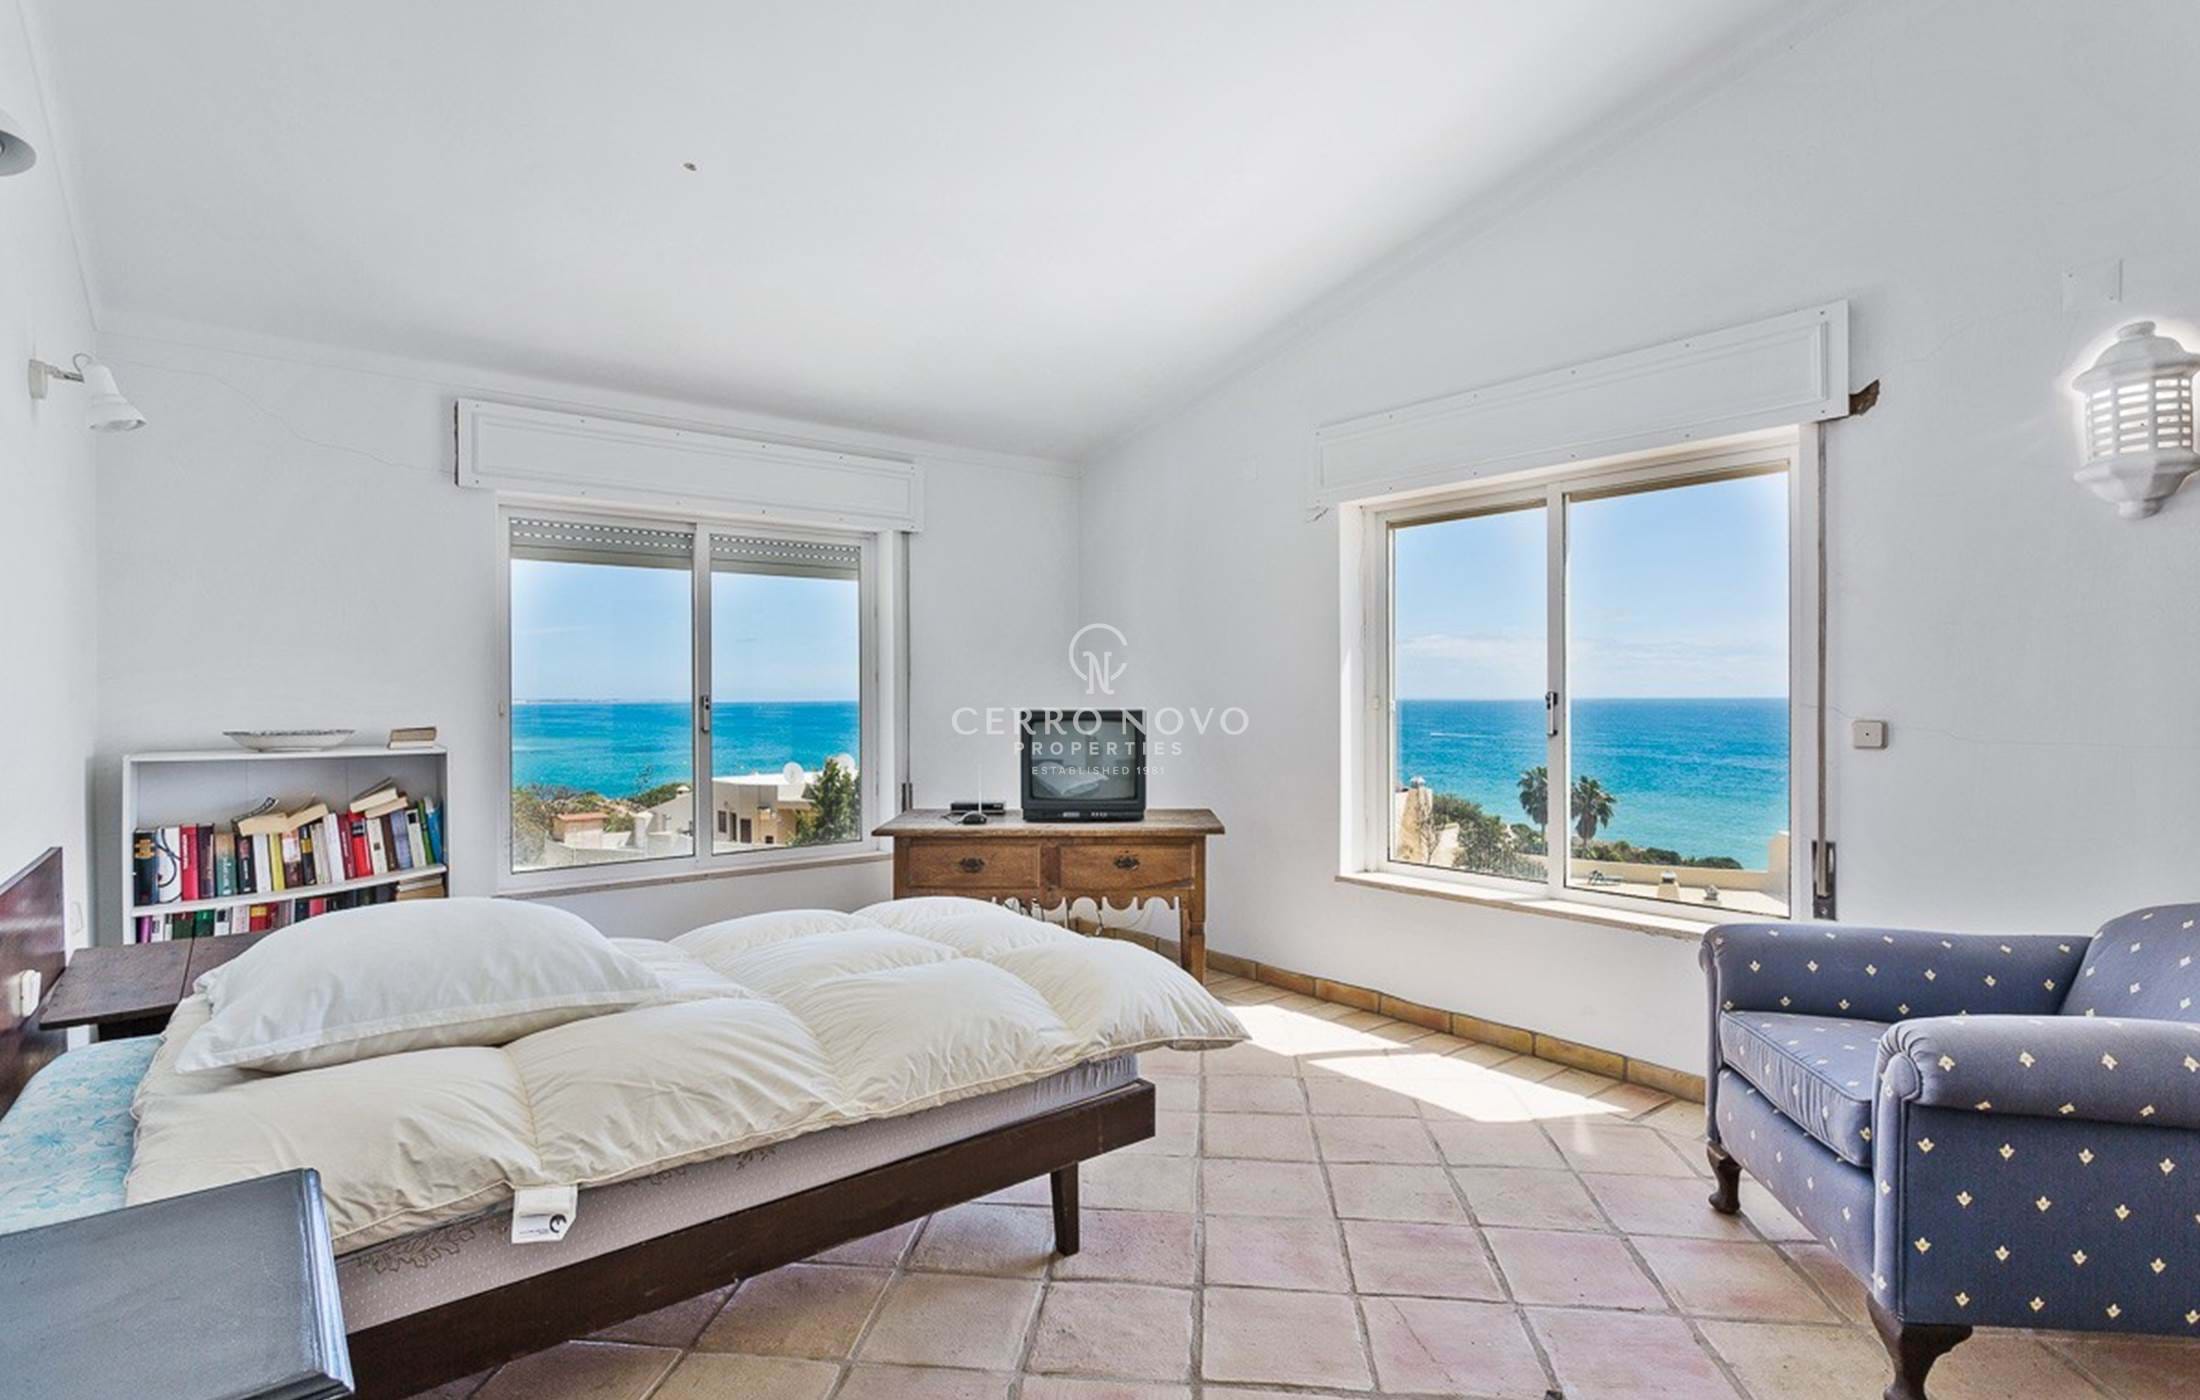 Incredibly spacious detached villa with outstanding ocean views